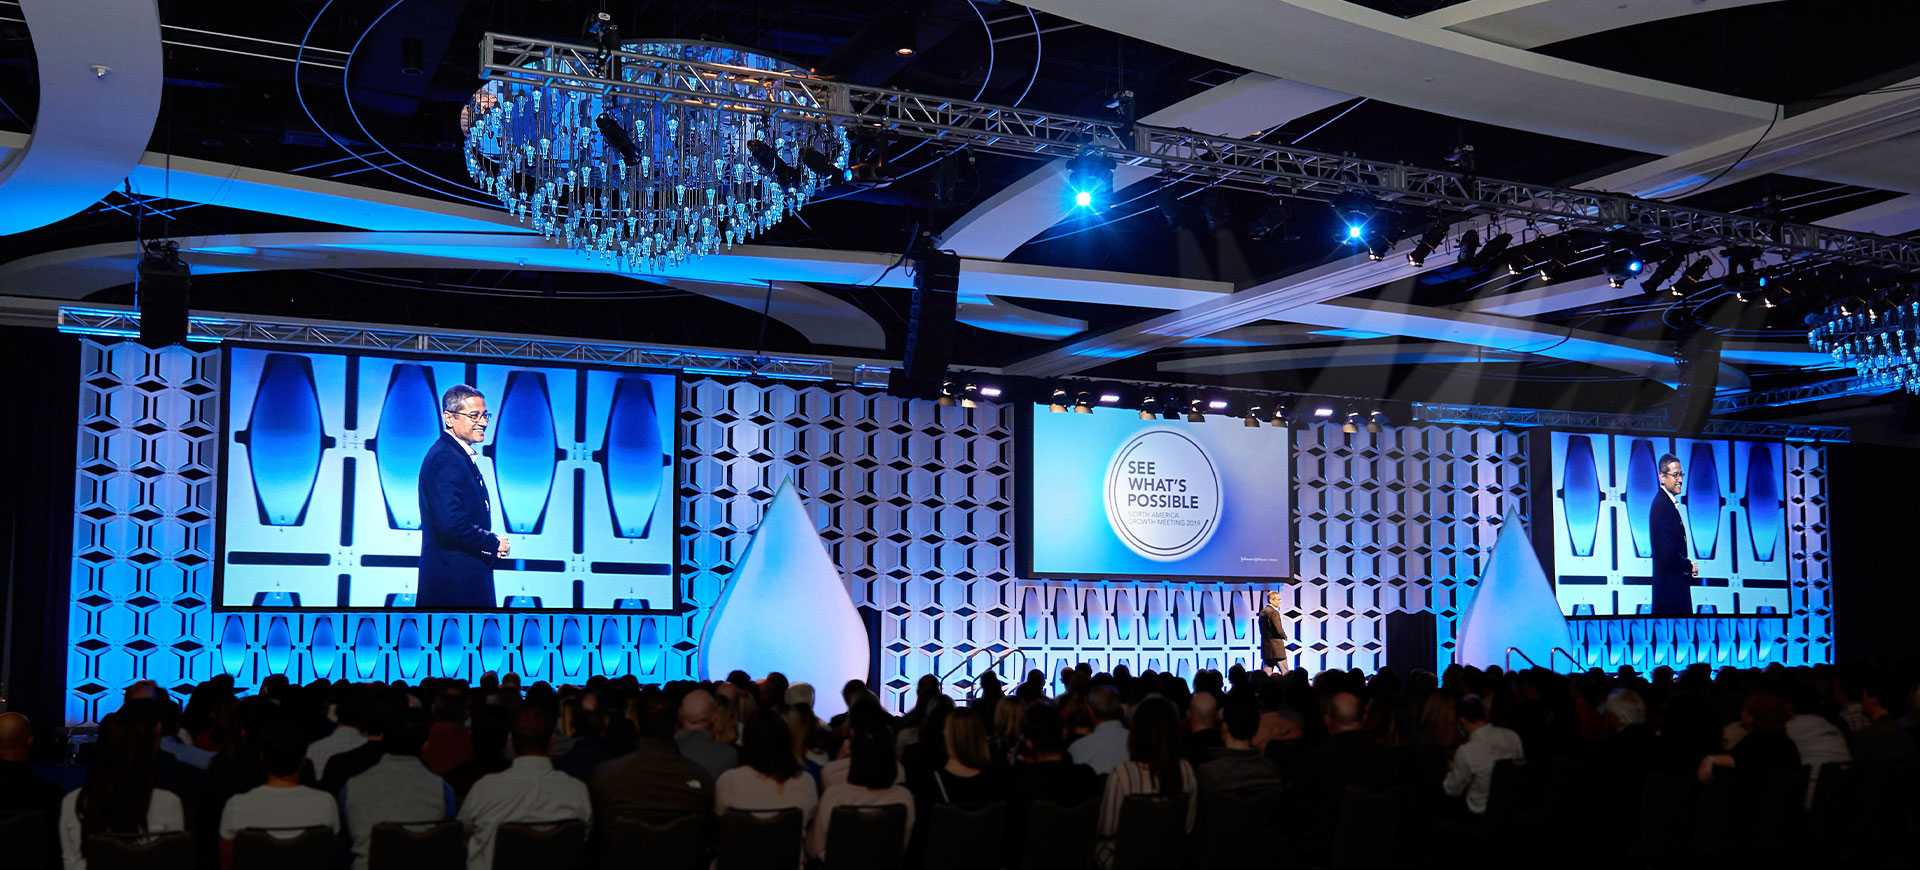 Professional Event Production for life sciences